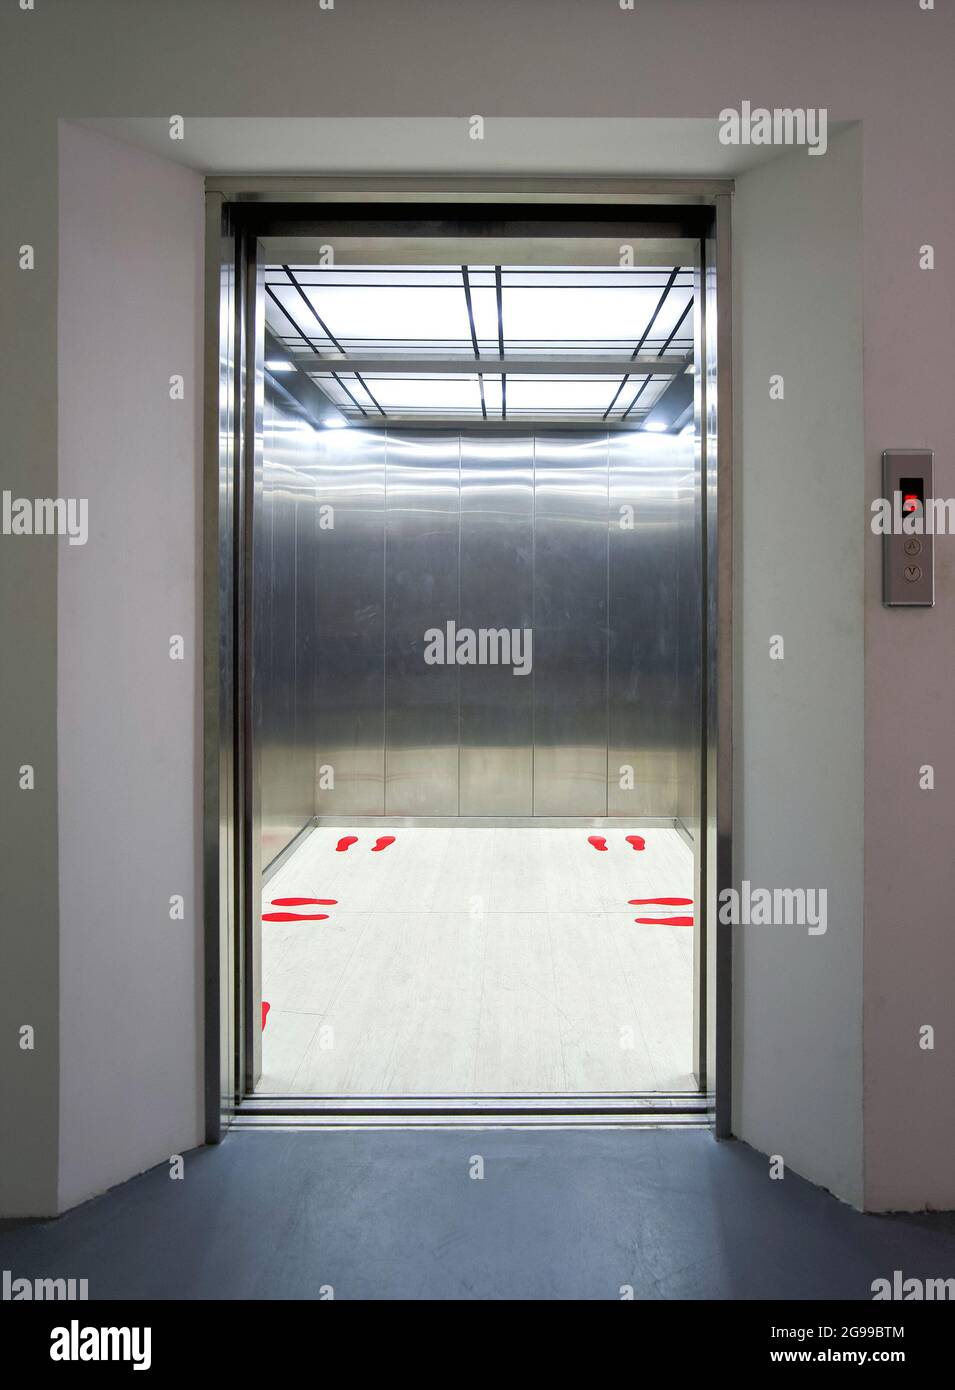 Office building elevator entrance. Red footprint symbol inside the elevator show standing position and distance of each person. Social distancing to r Stock Photo